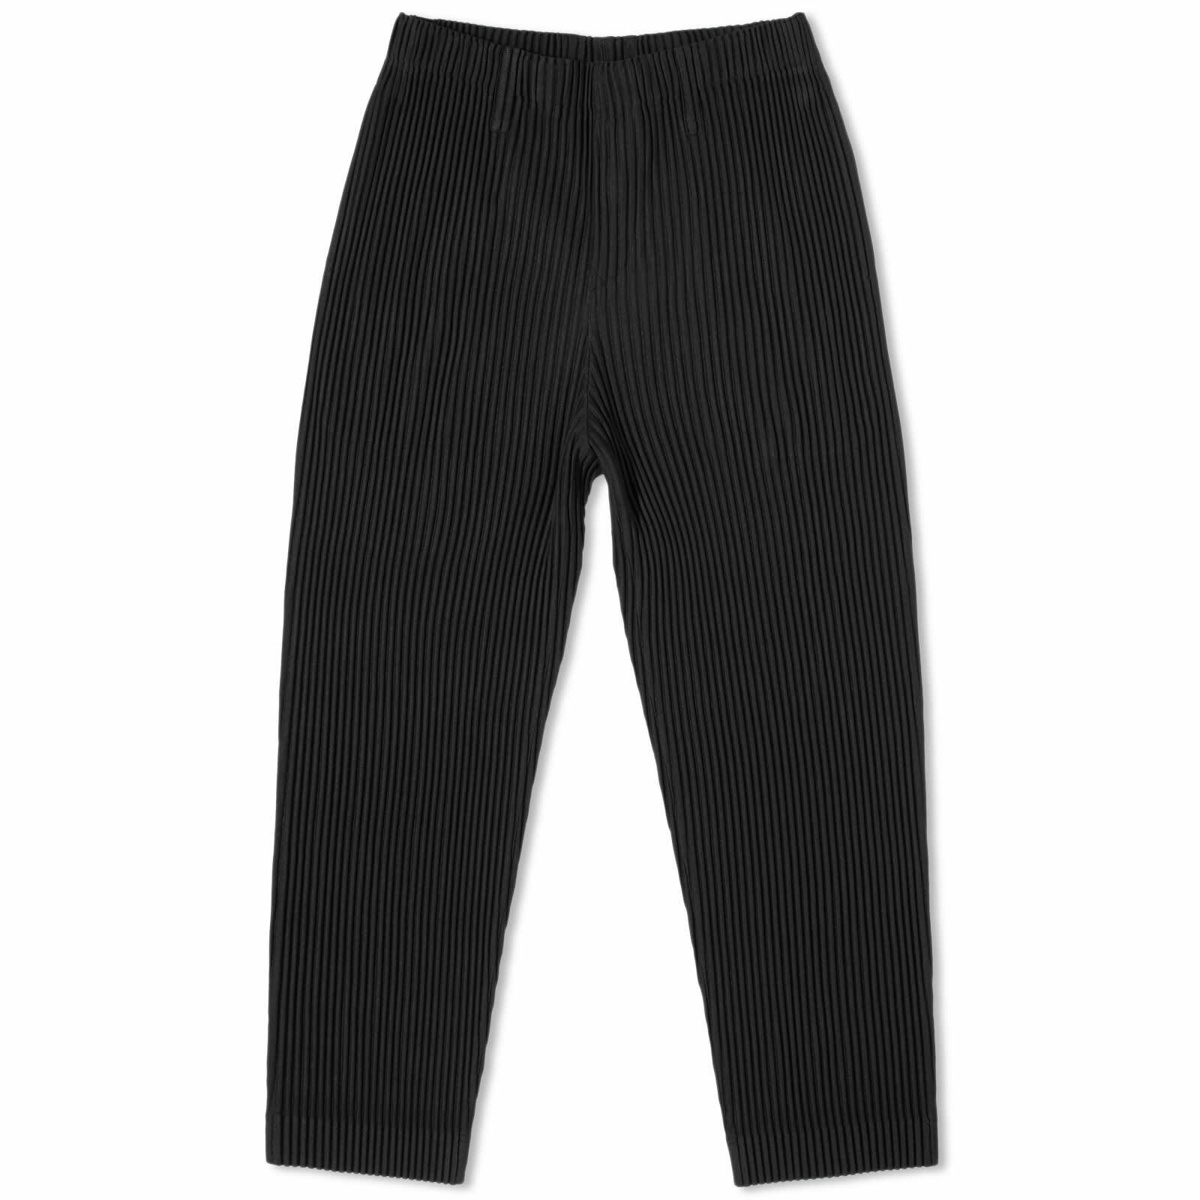 Homme Plissé Issey Miyake JF150 Pleated Trouser Black